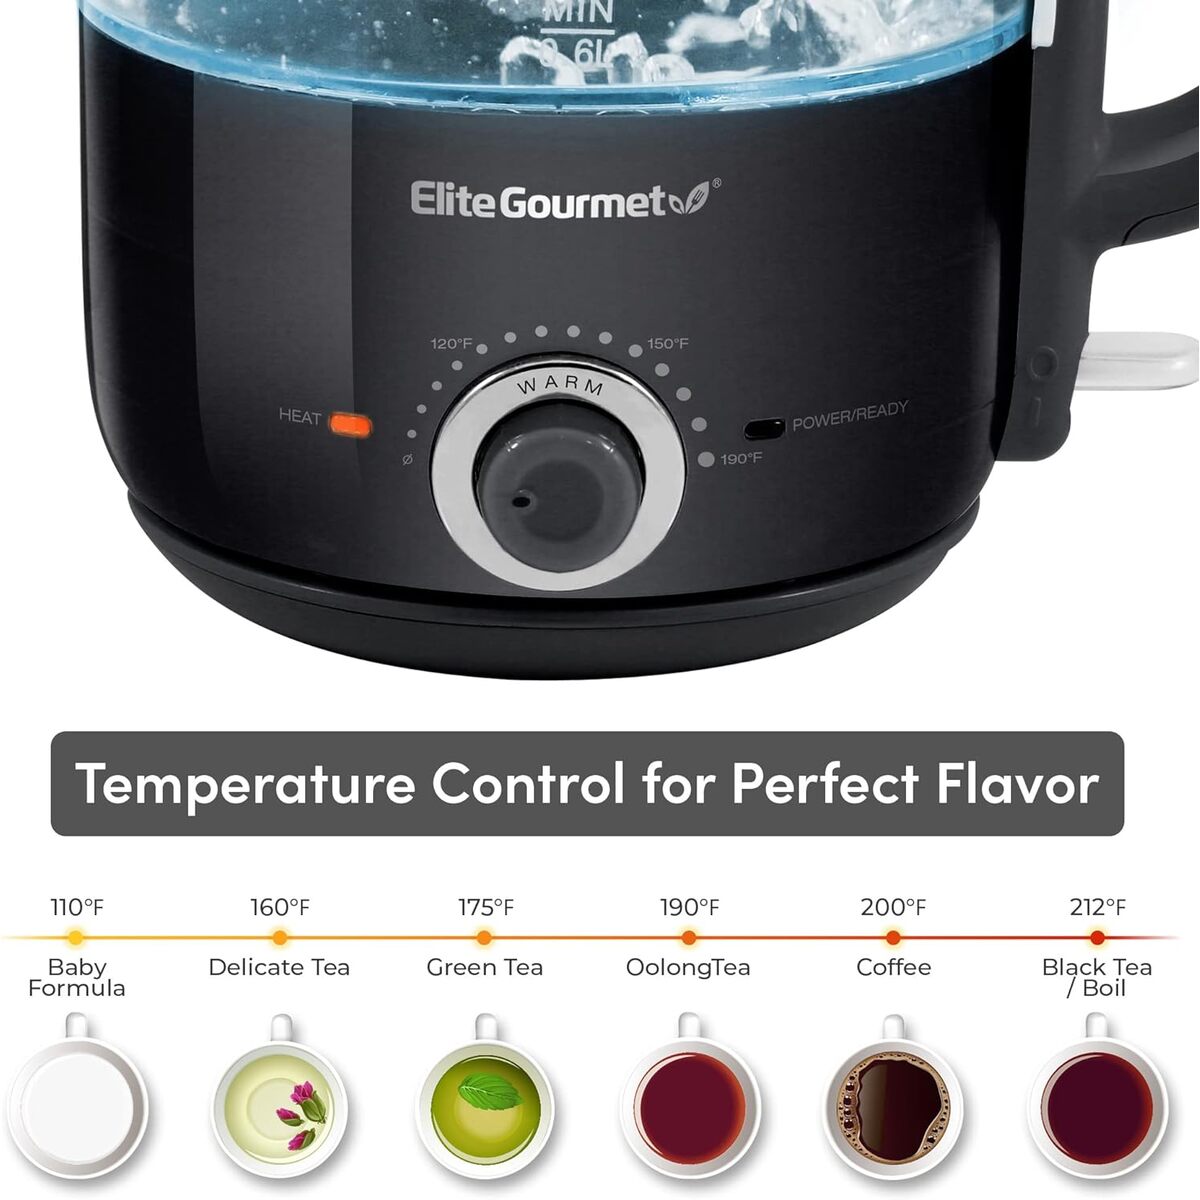 Elite Gourmet 1.2L Electric Kettle with Temperature Settings & Keep Warm